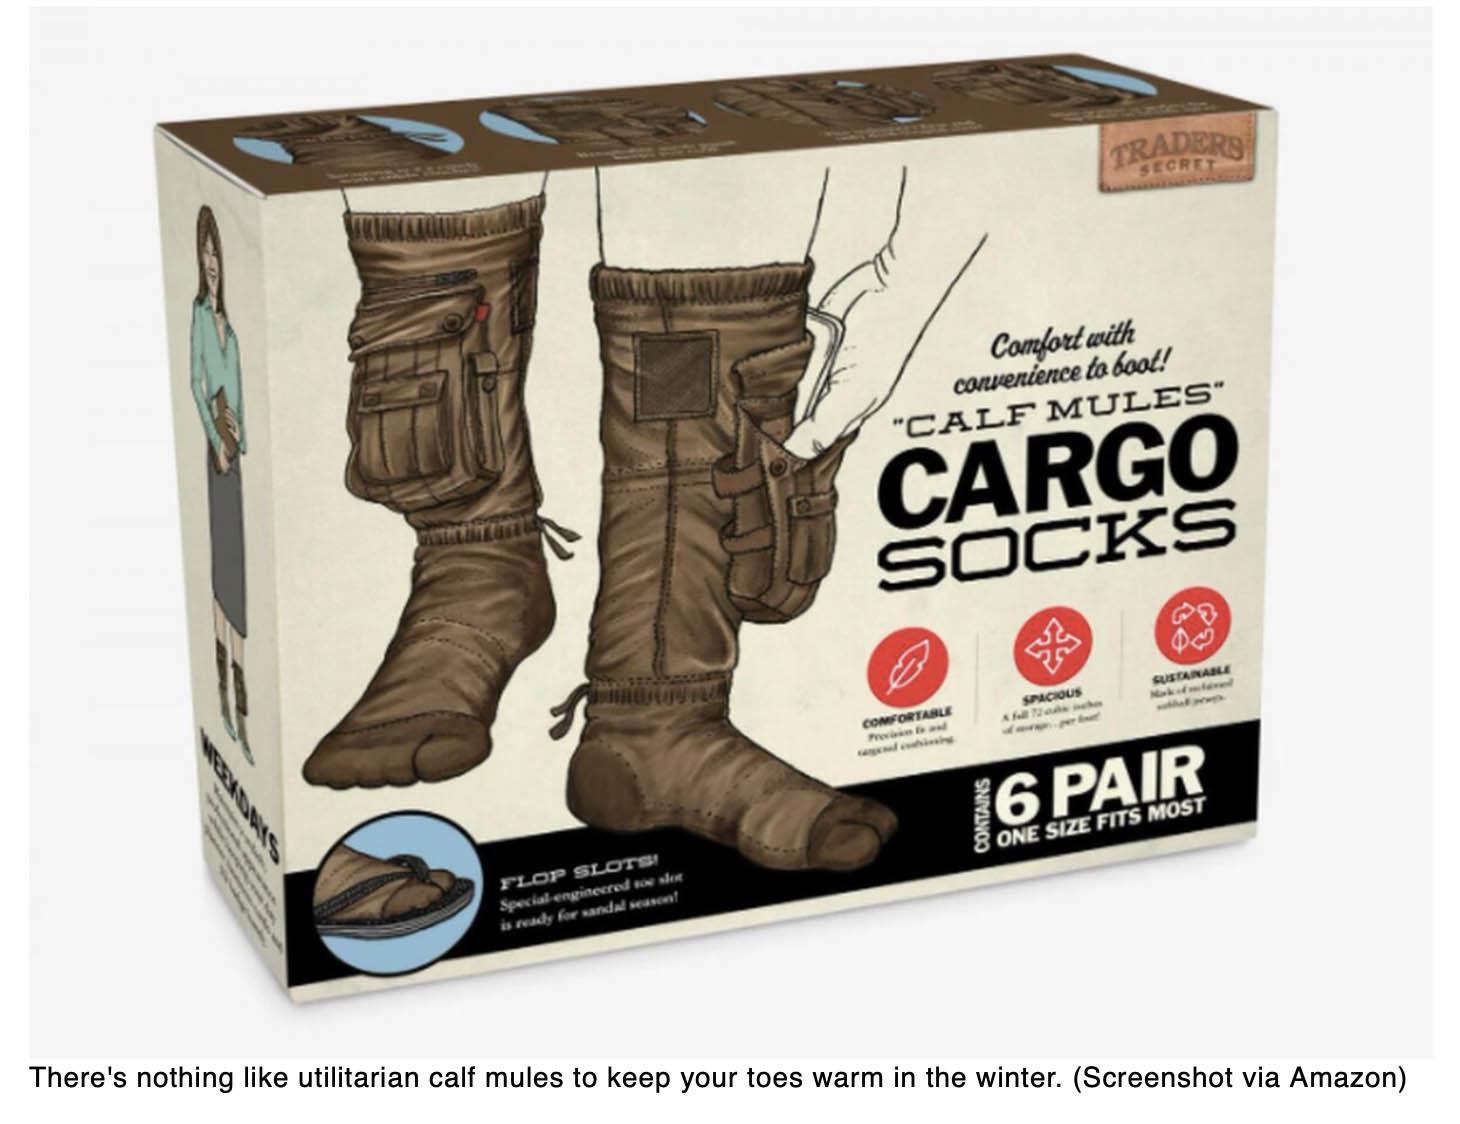  Behold! Cargo socks, the gift you never knew you needed